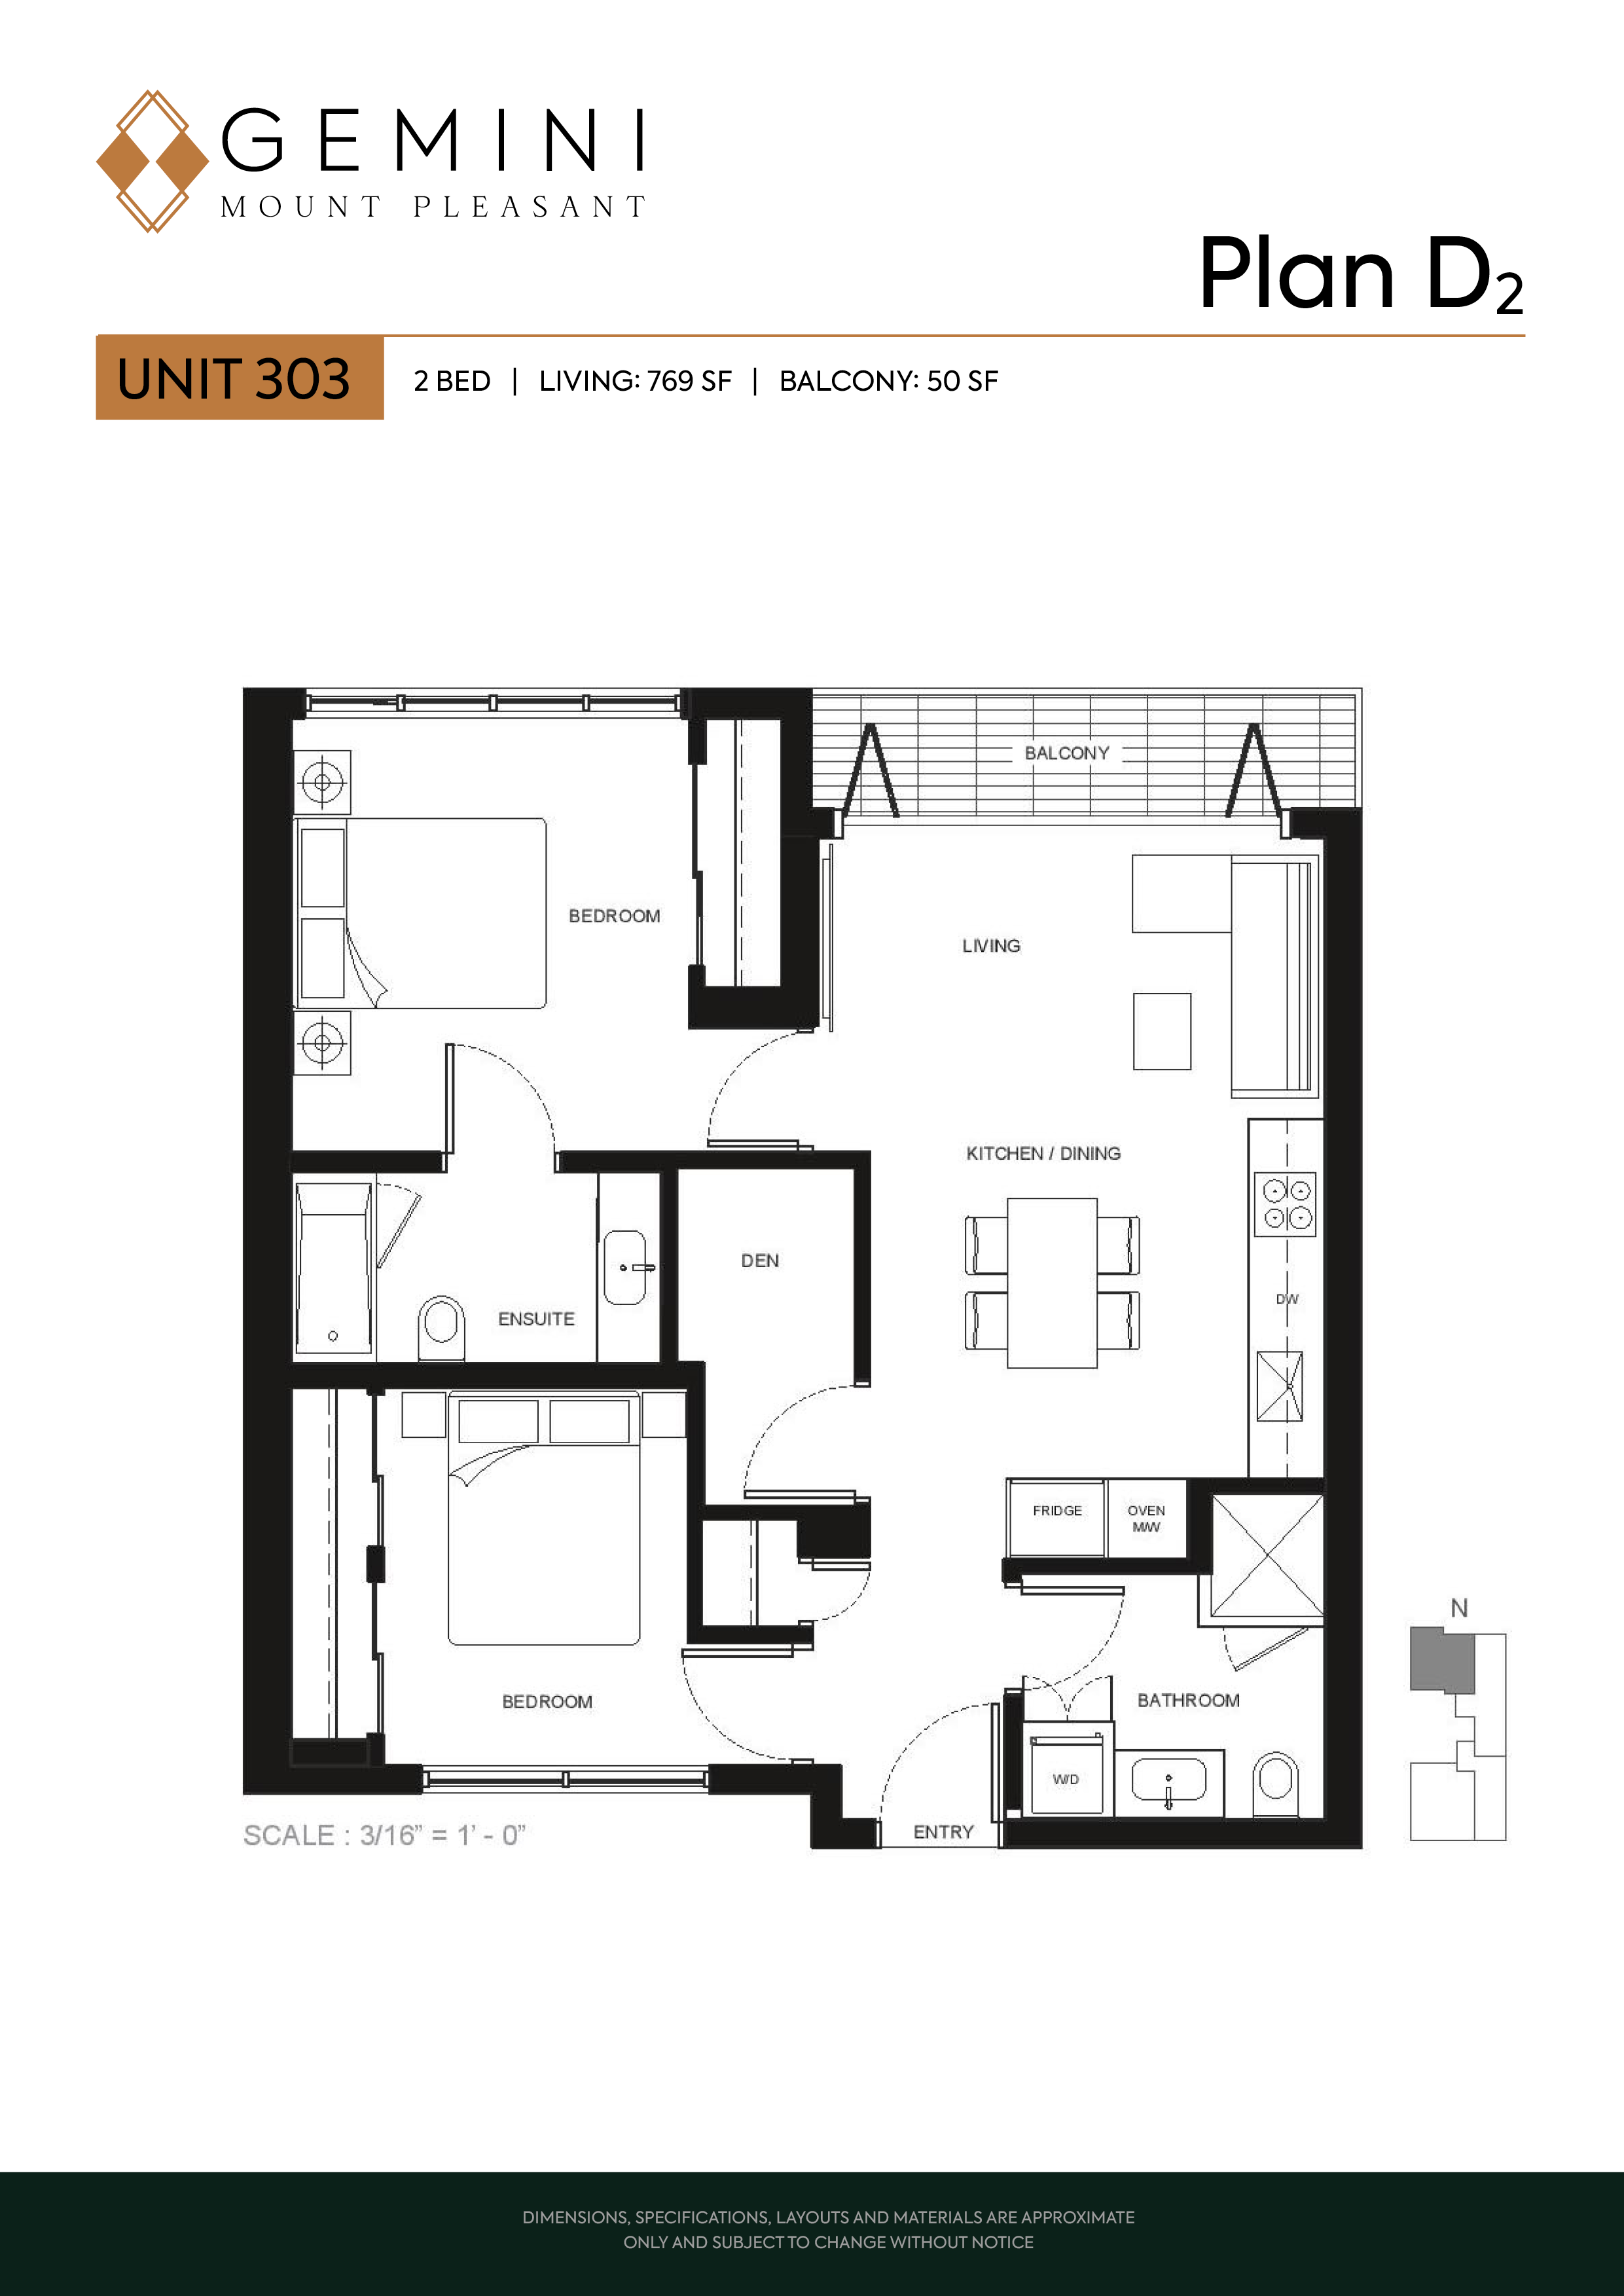 Plan D2 Floor Plan of Gemini Mount Pleasant Condos with undefined beds